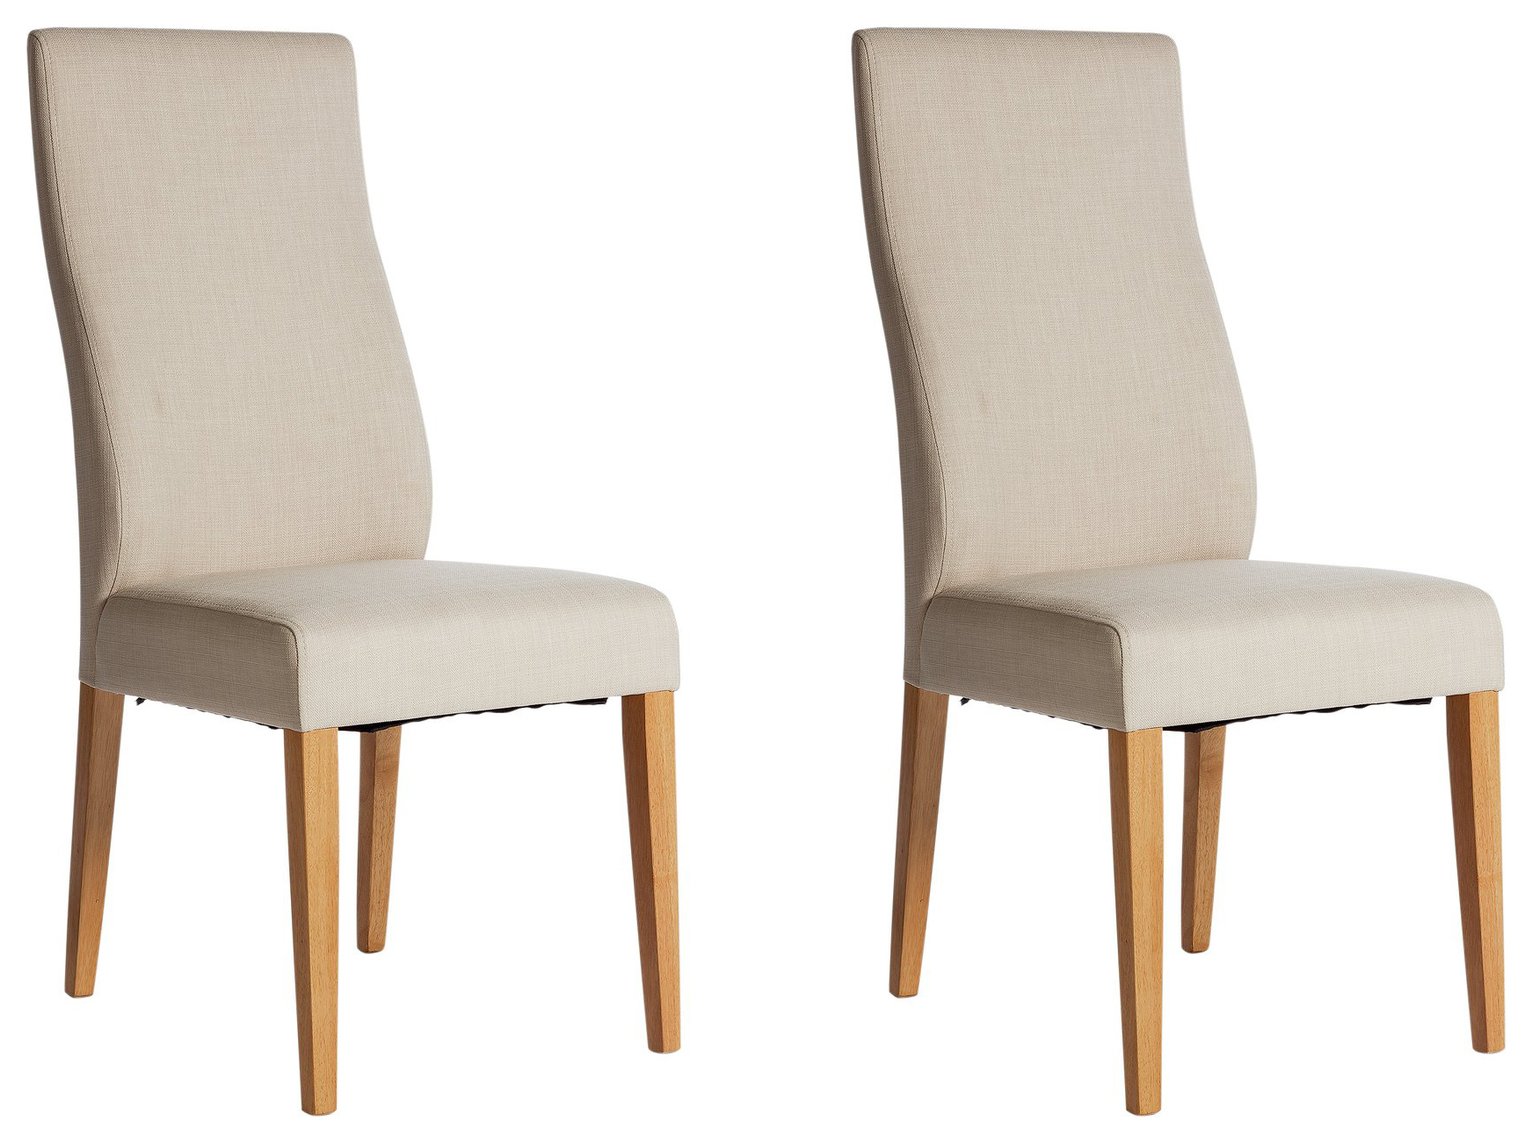 Argos Home Pair of High Back Curved Chairs - Oatmeal